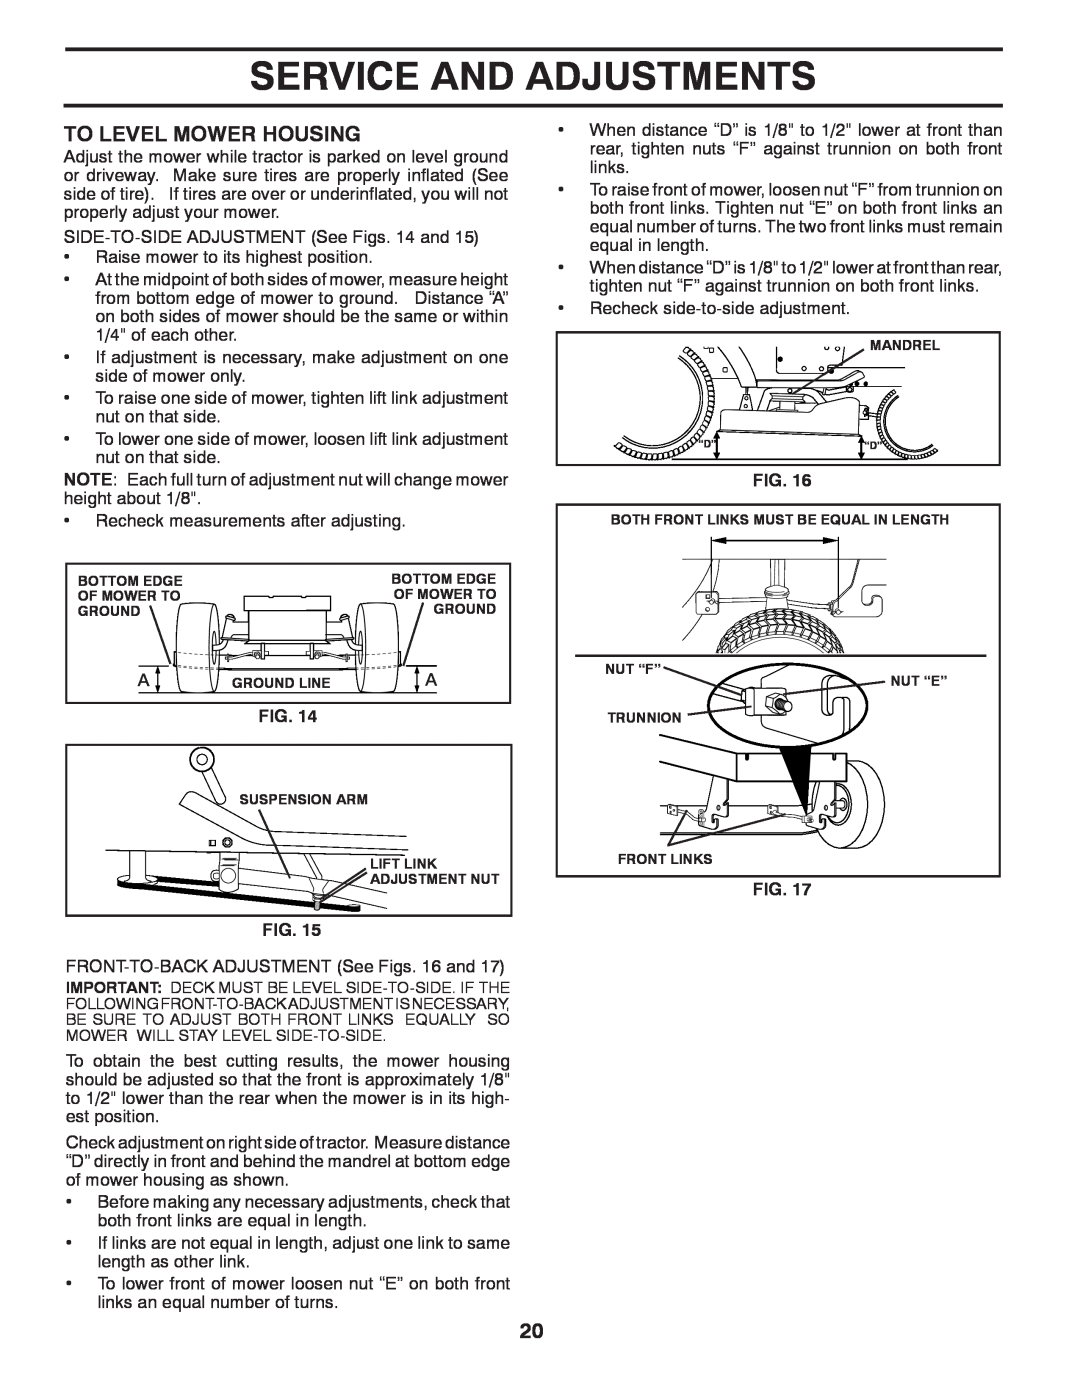 Poulan PO15542LT manual To Level Mower Housing, Service And Adjustments, Fig 